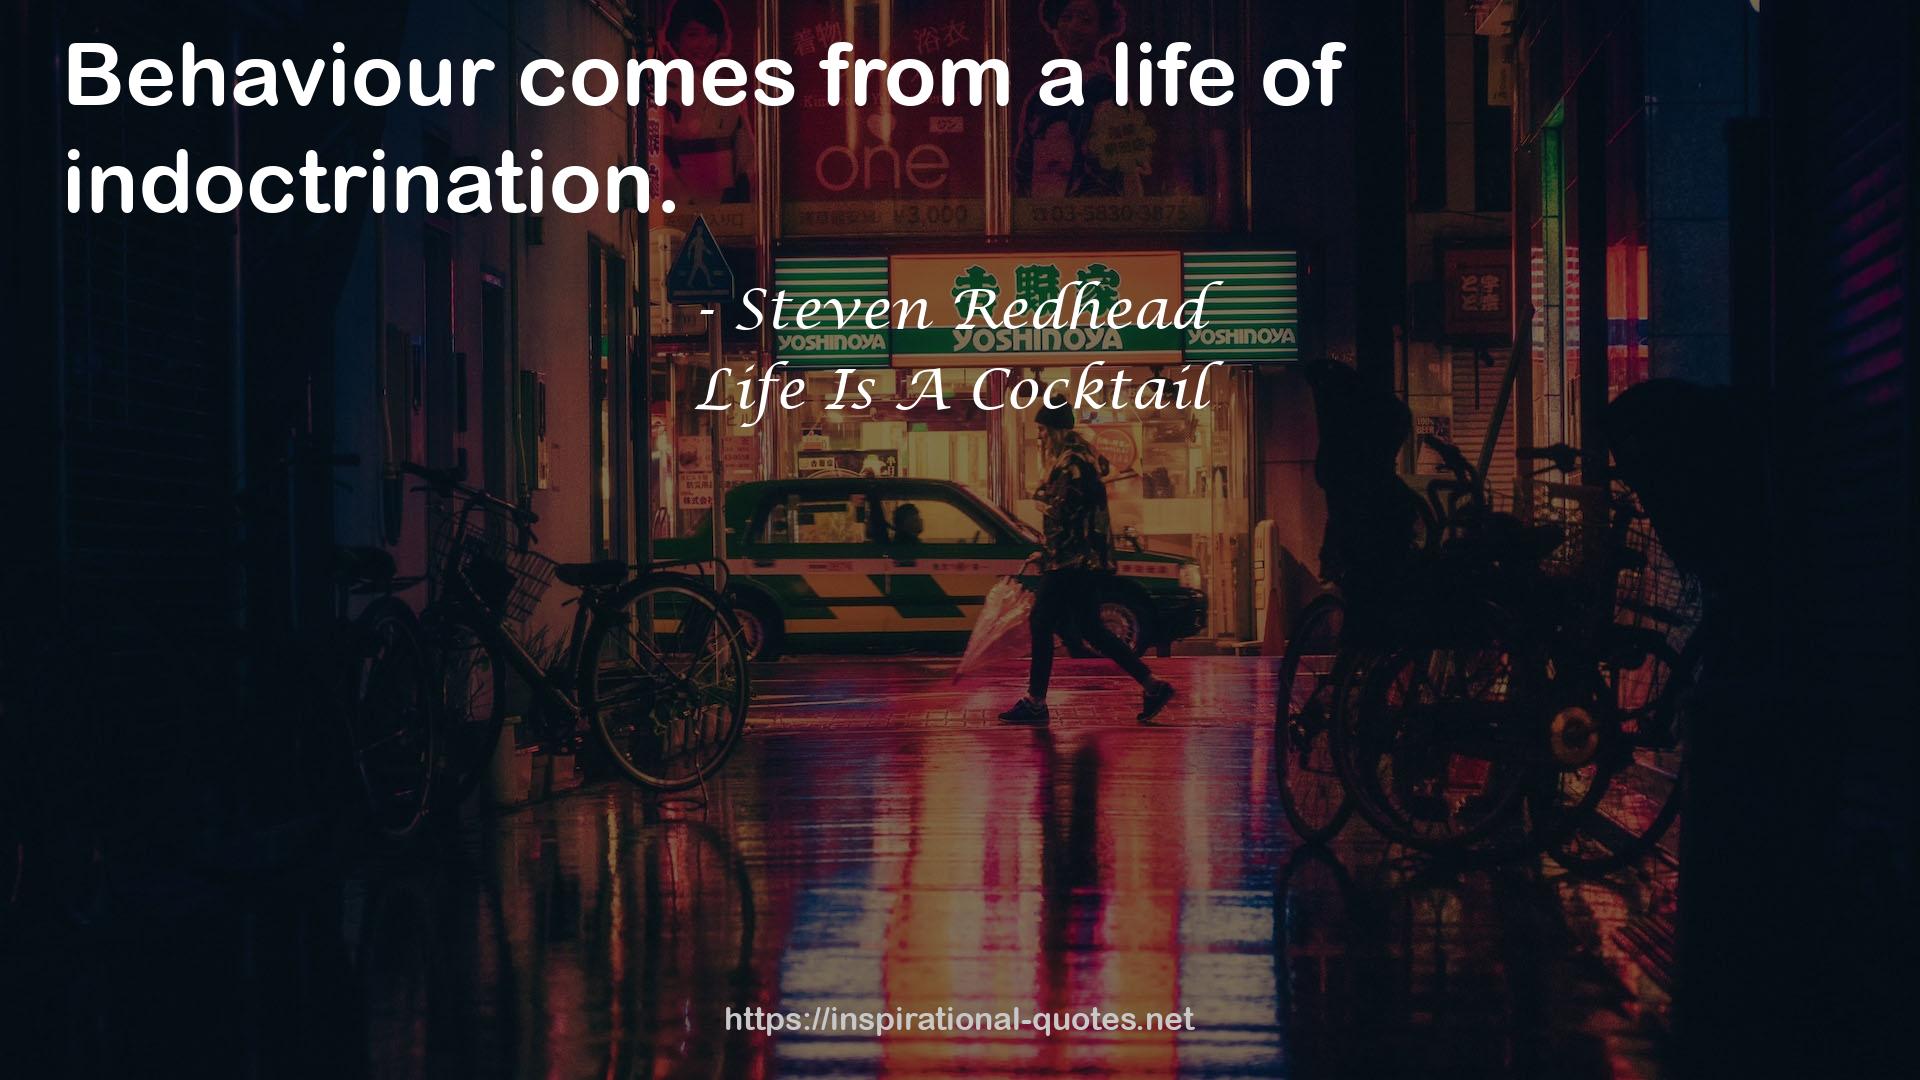 Steven Redhead QUOTES